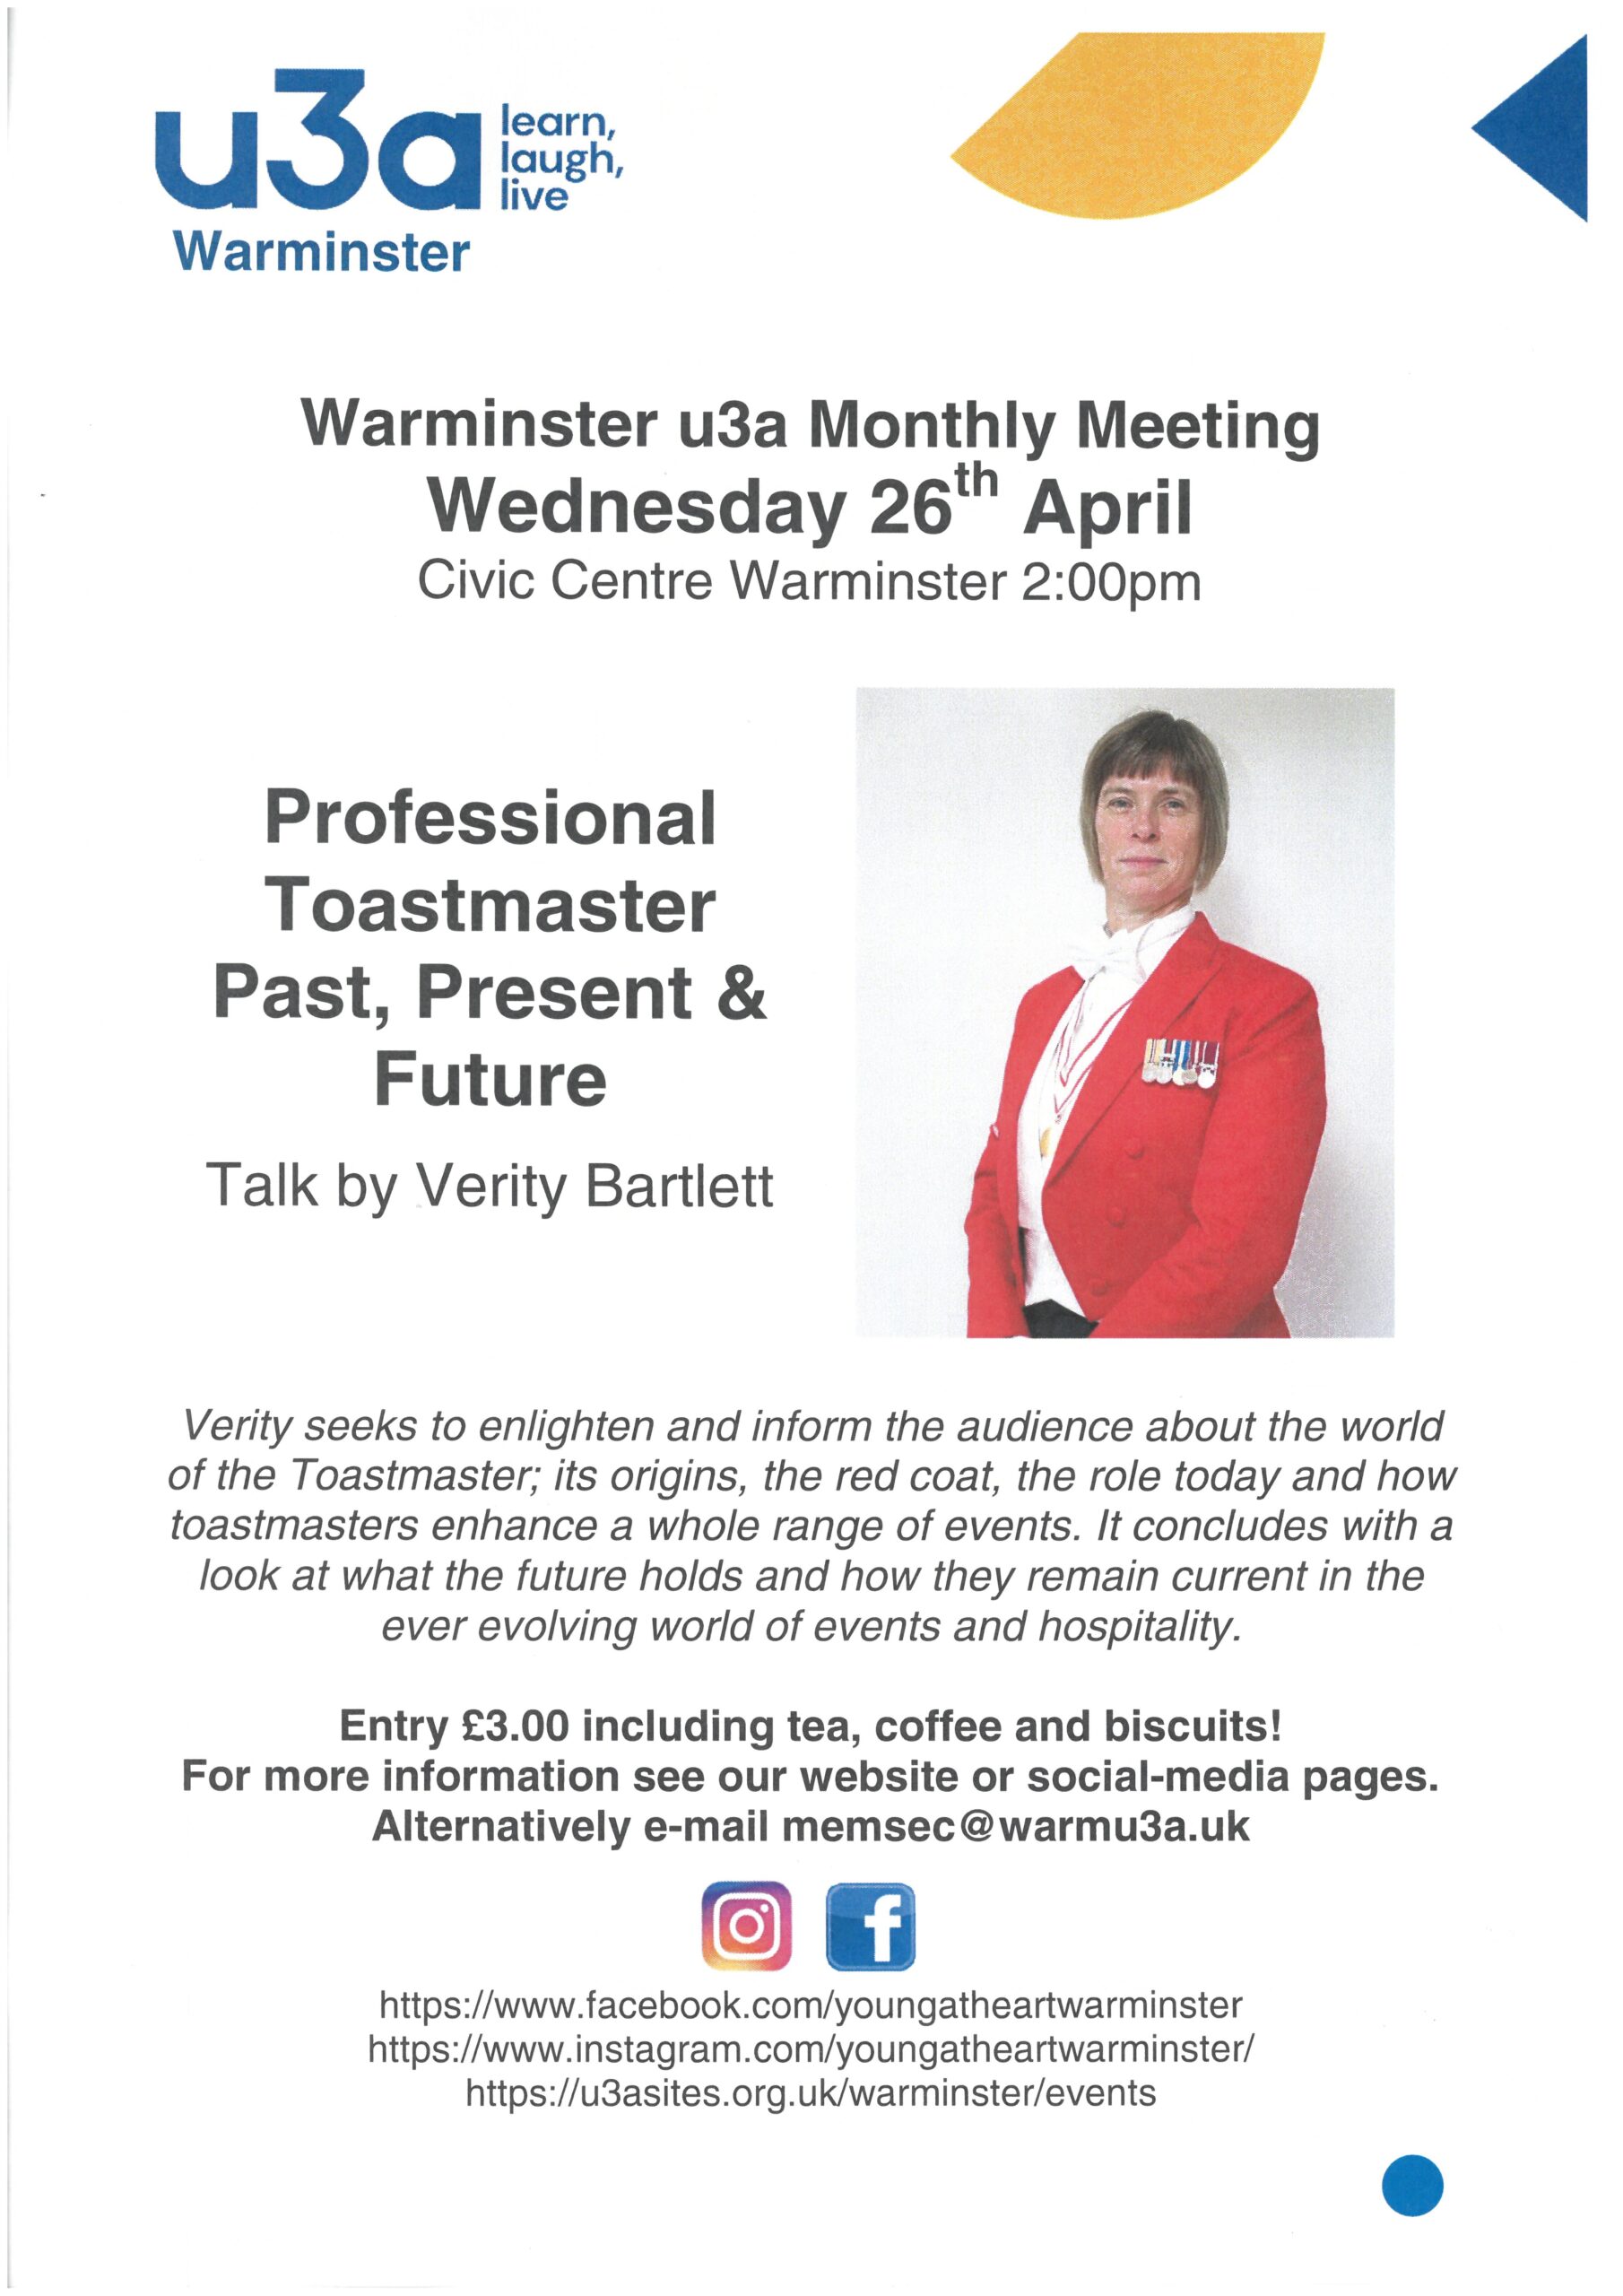 Warminster U3A Monthly Meeting - Professional Toastmaster: Past, Present & Future